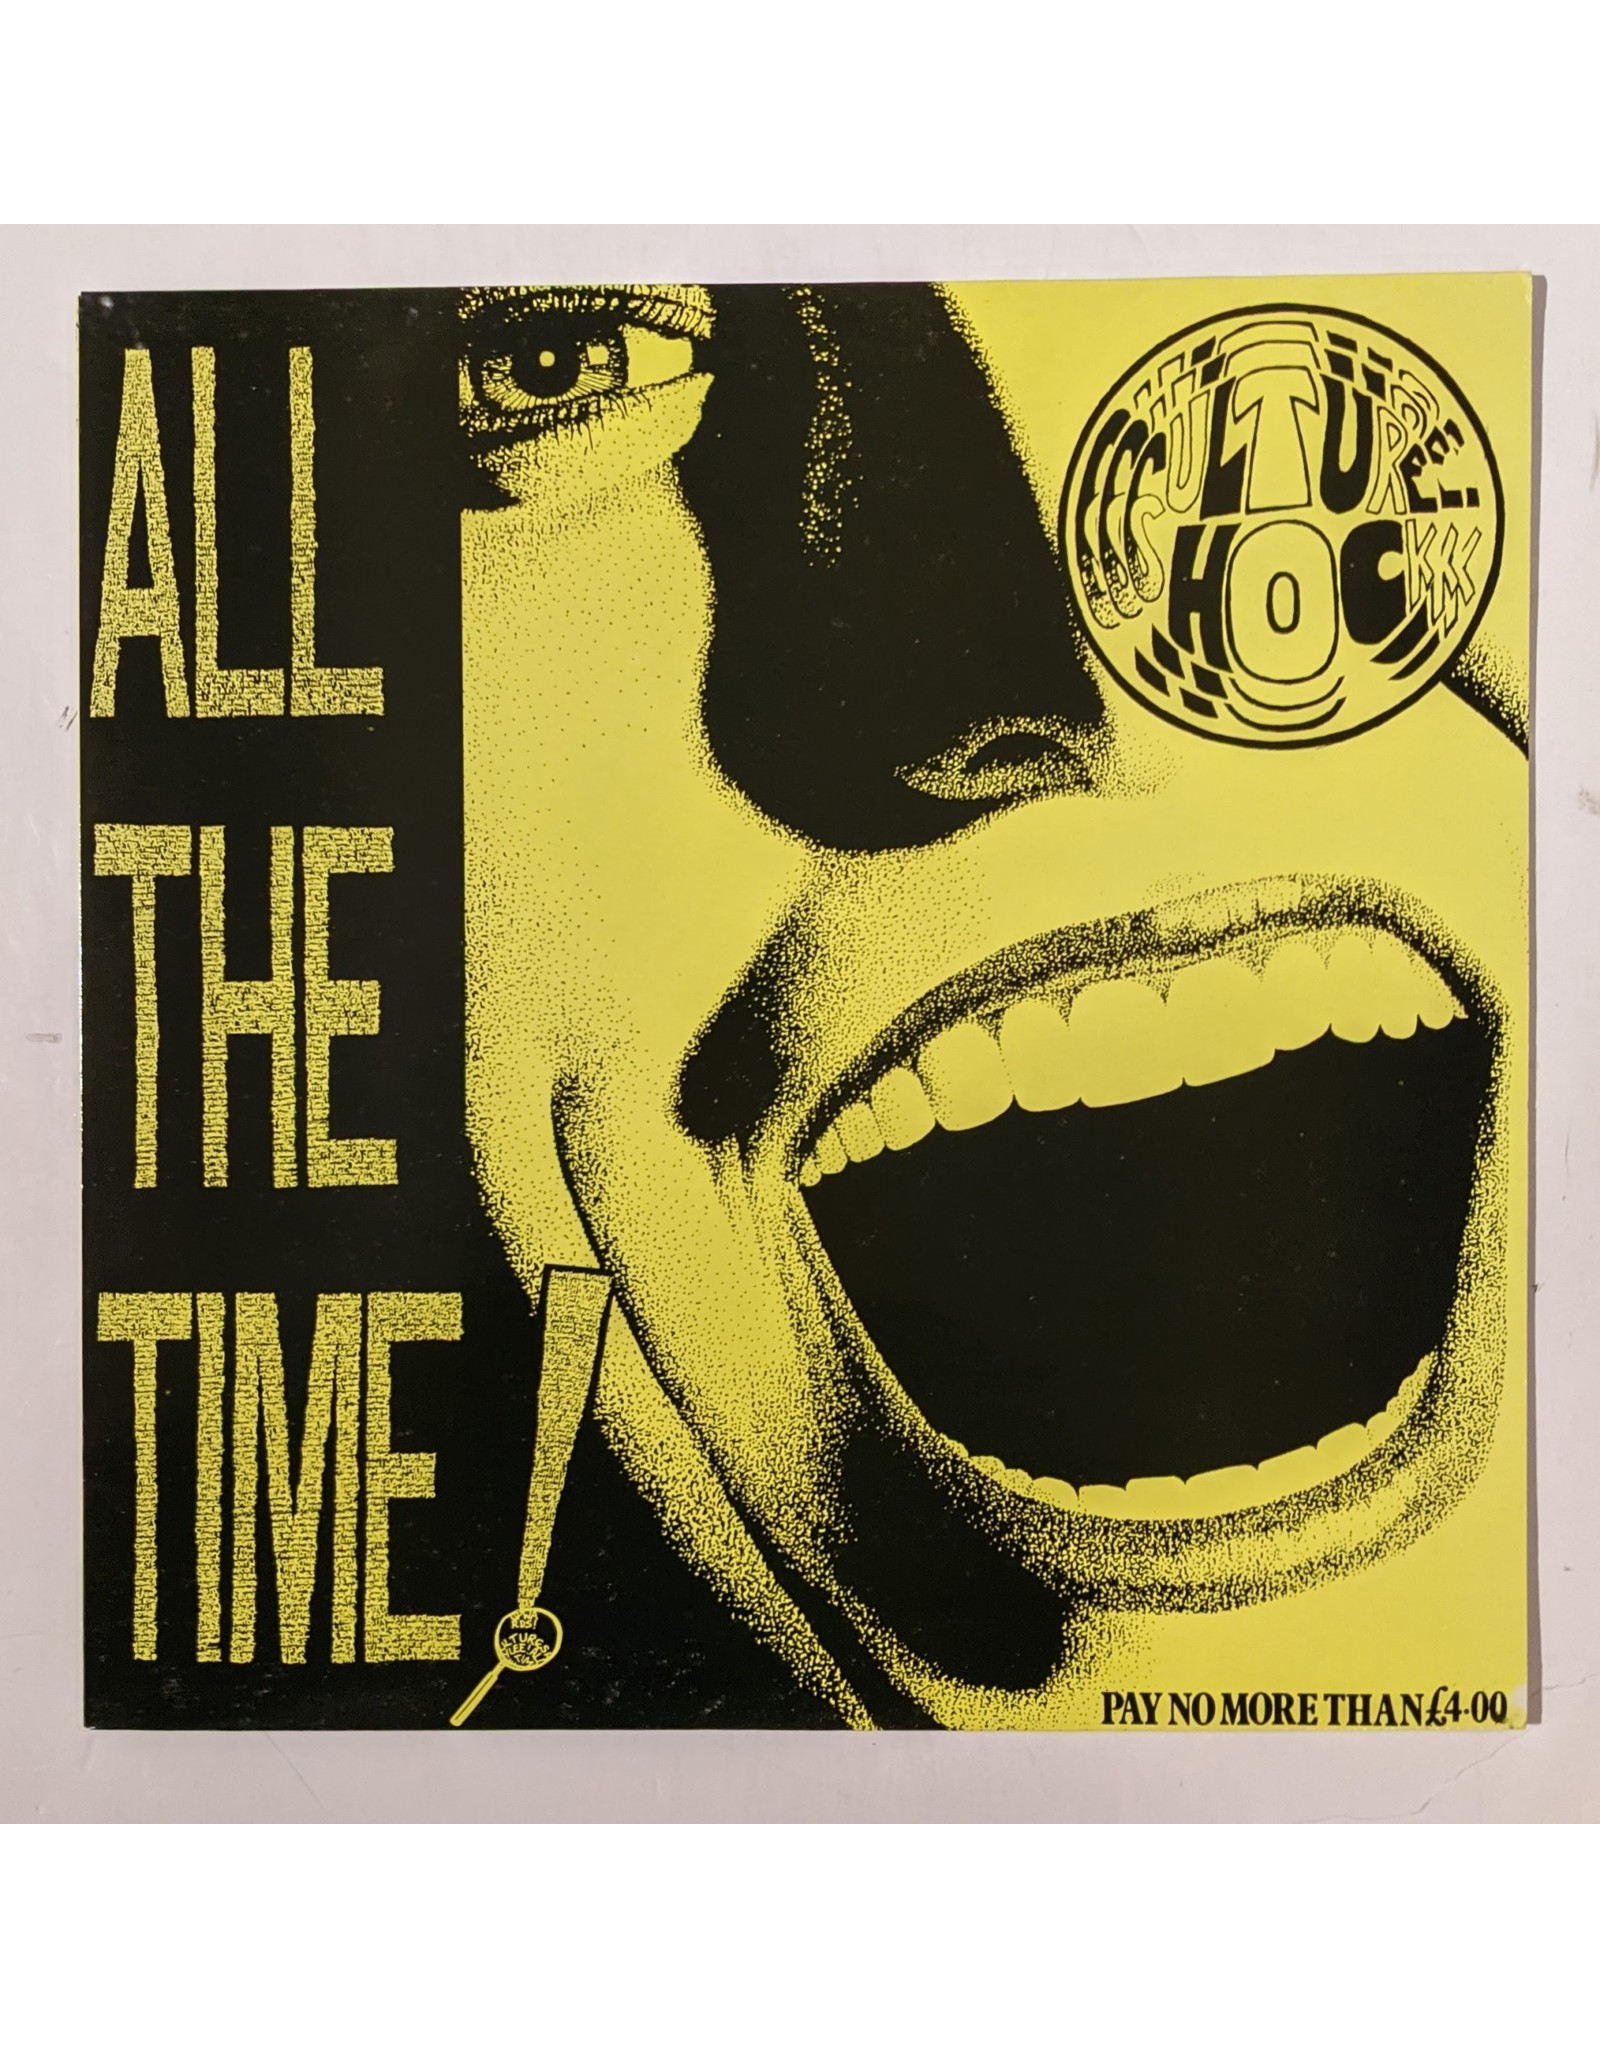 USED: Culture Shock: All the Time LP